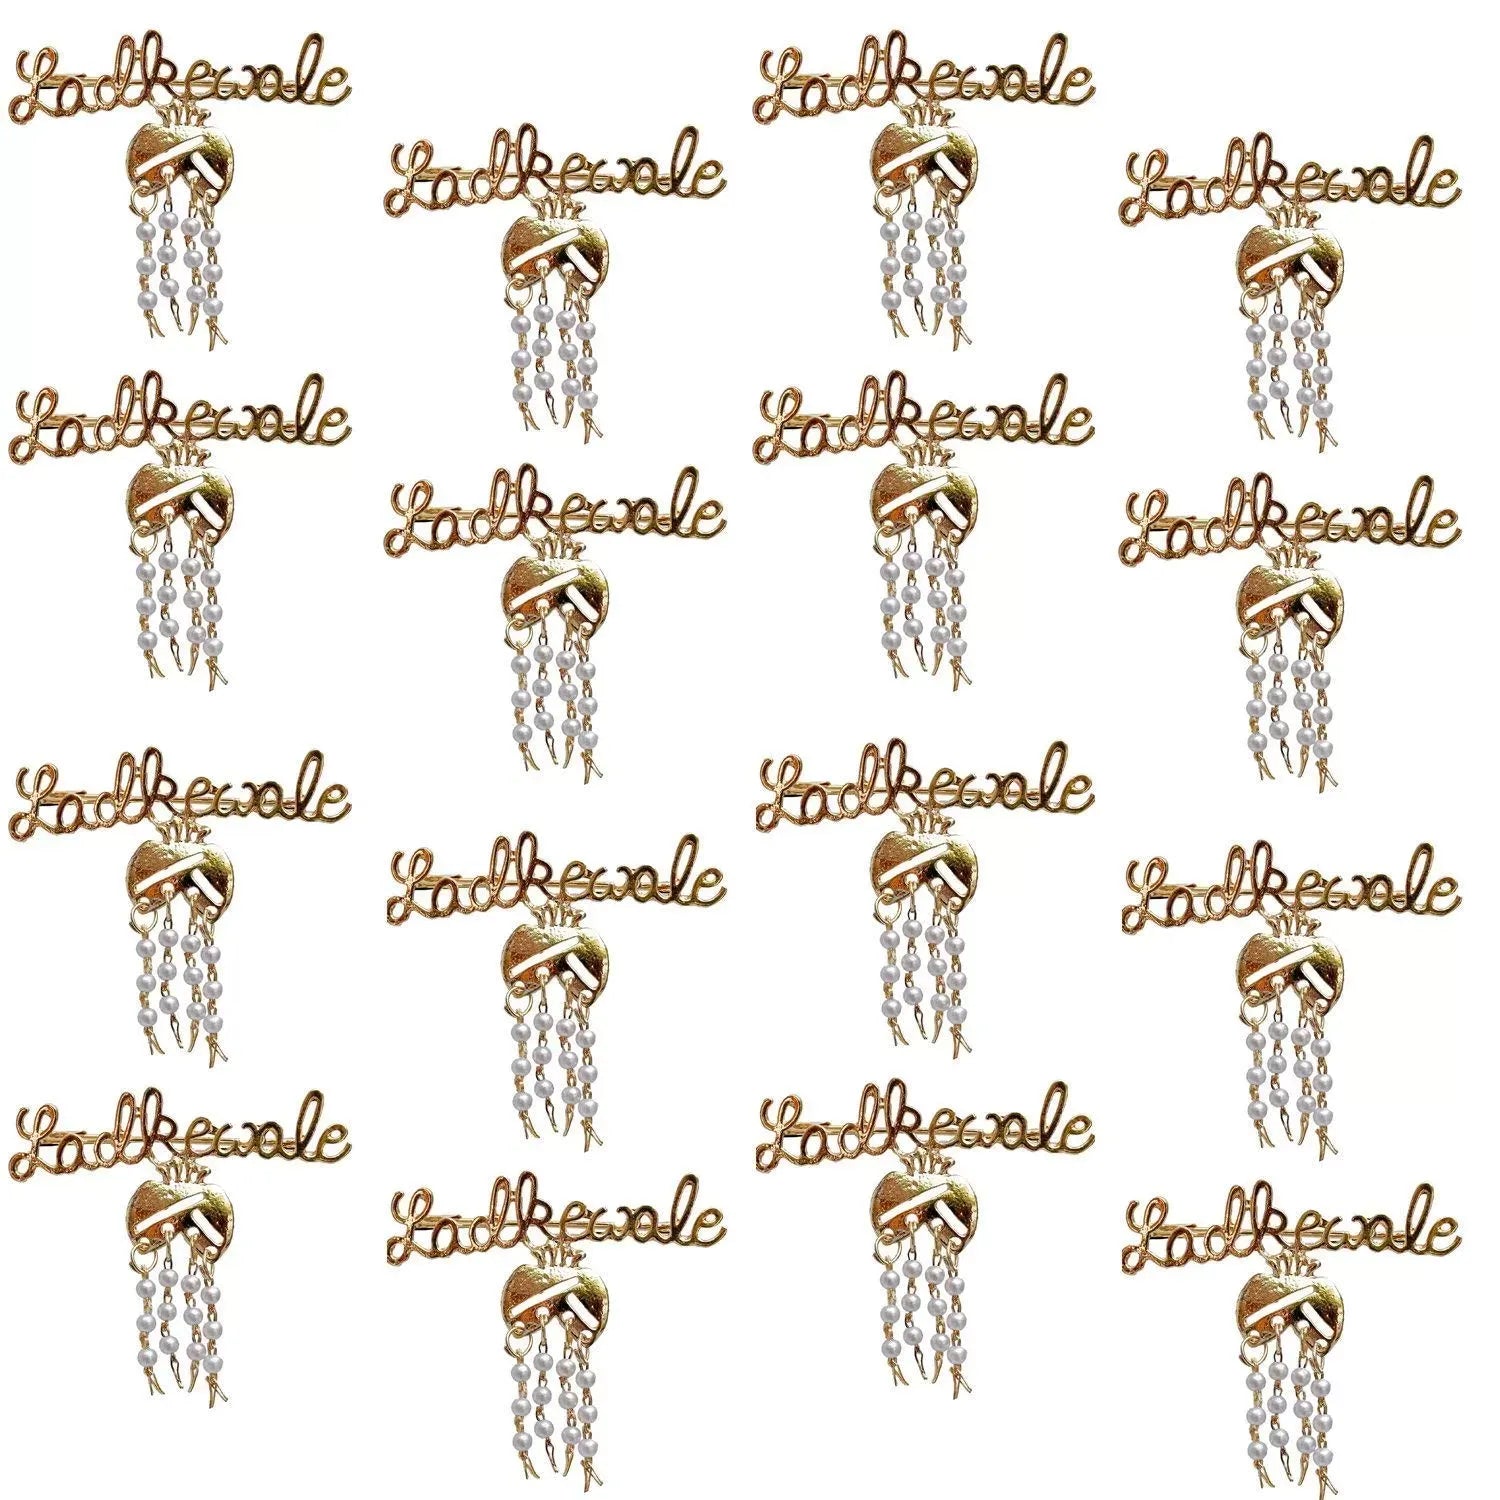 Ladkewale Brooches – Pack of 10